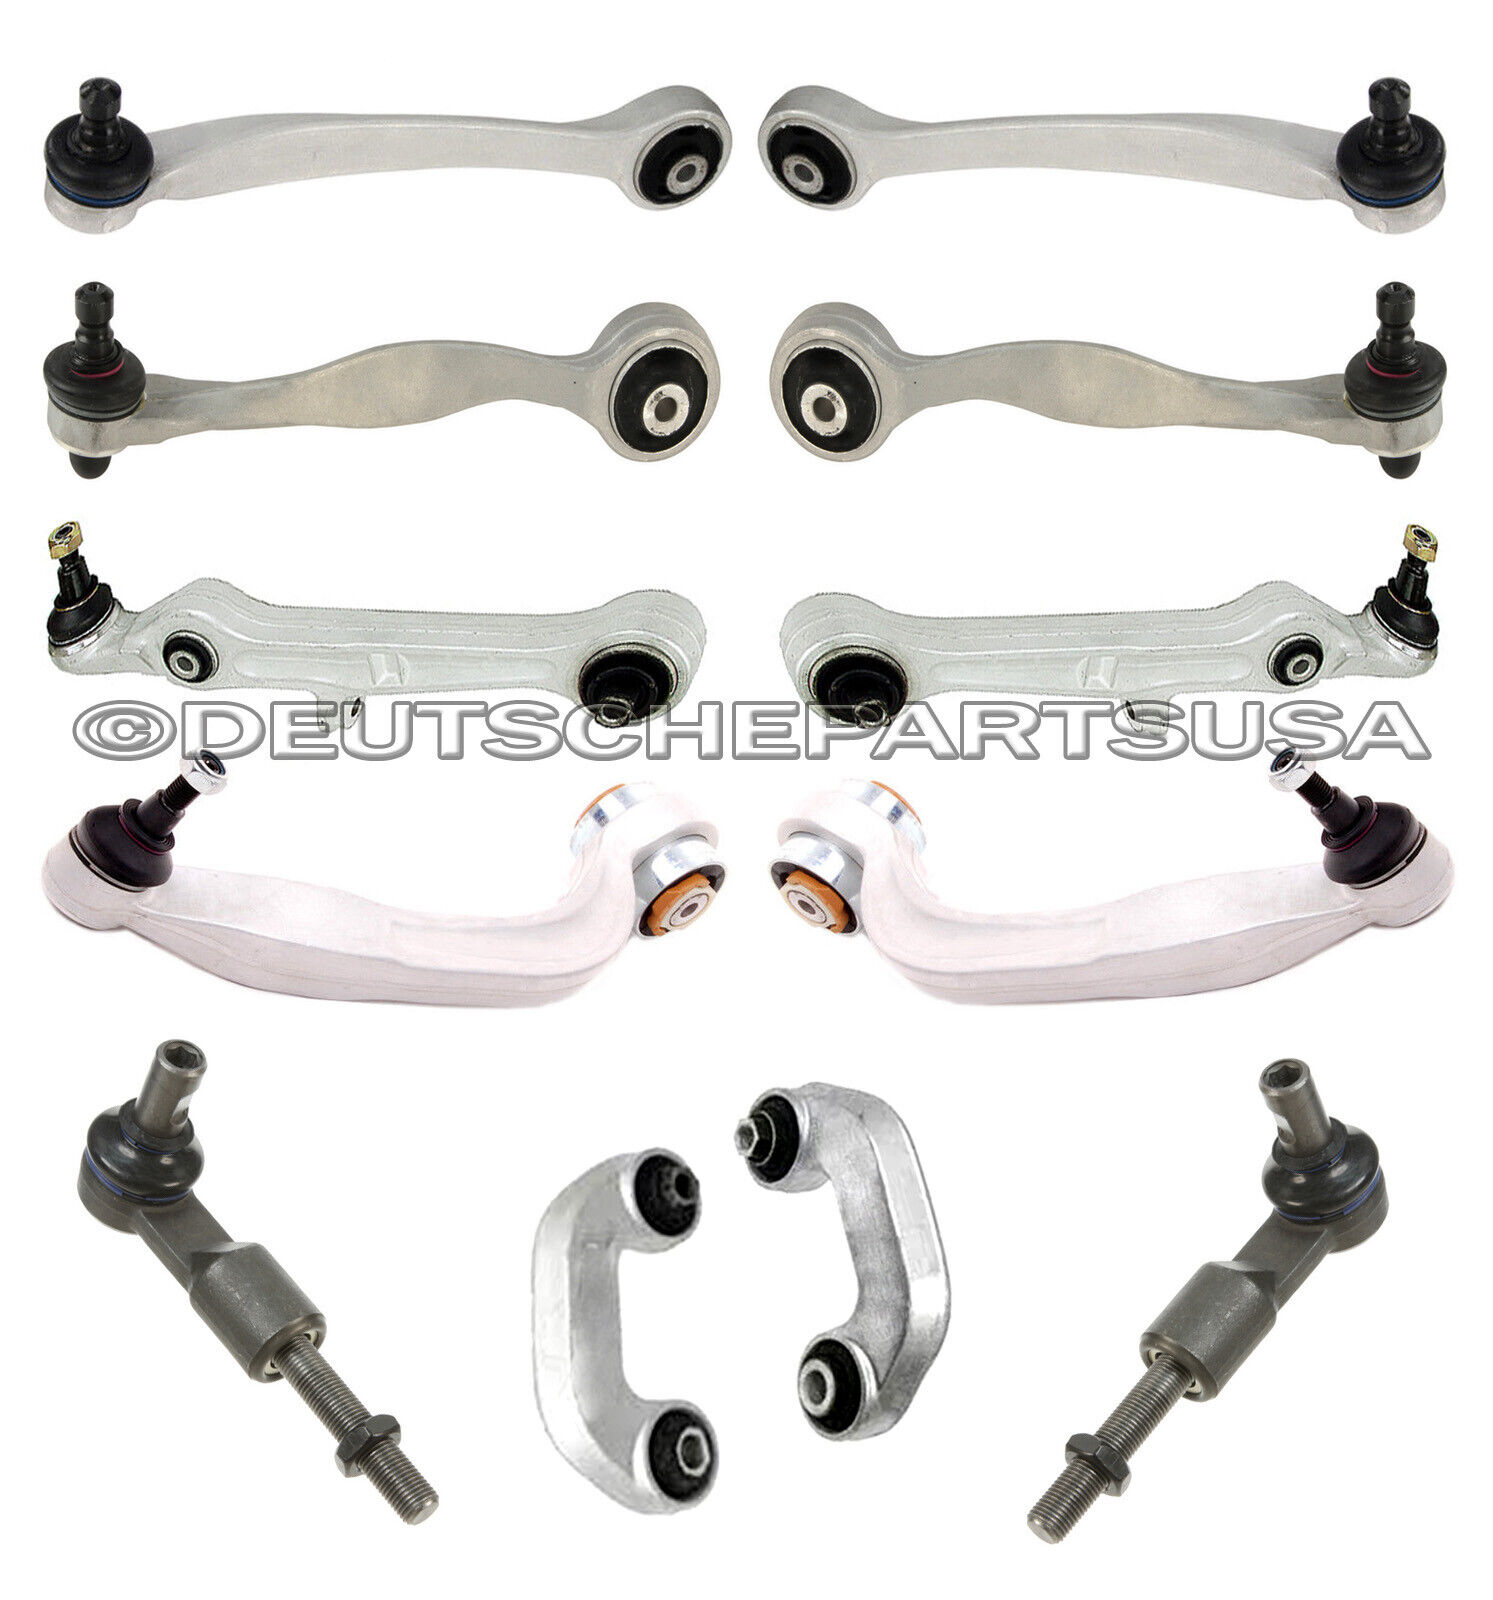 Audi S4 A4 Quattro 3.2 2.0 2.0T Control Arm Arms Ball Joint Sway Bar Tie Rod Kit